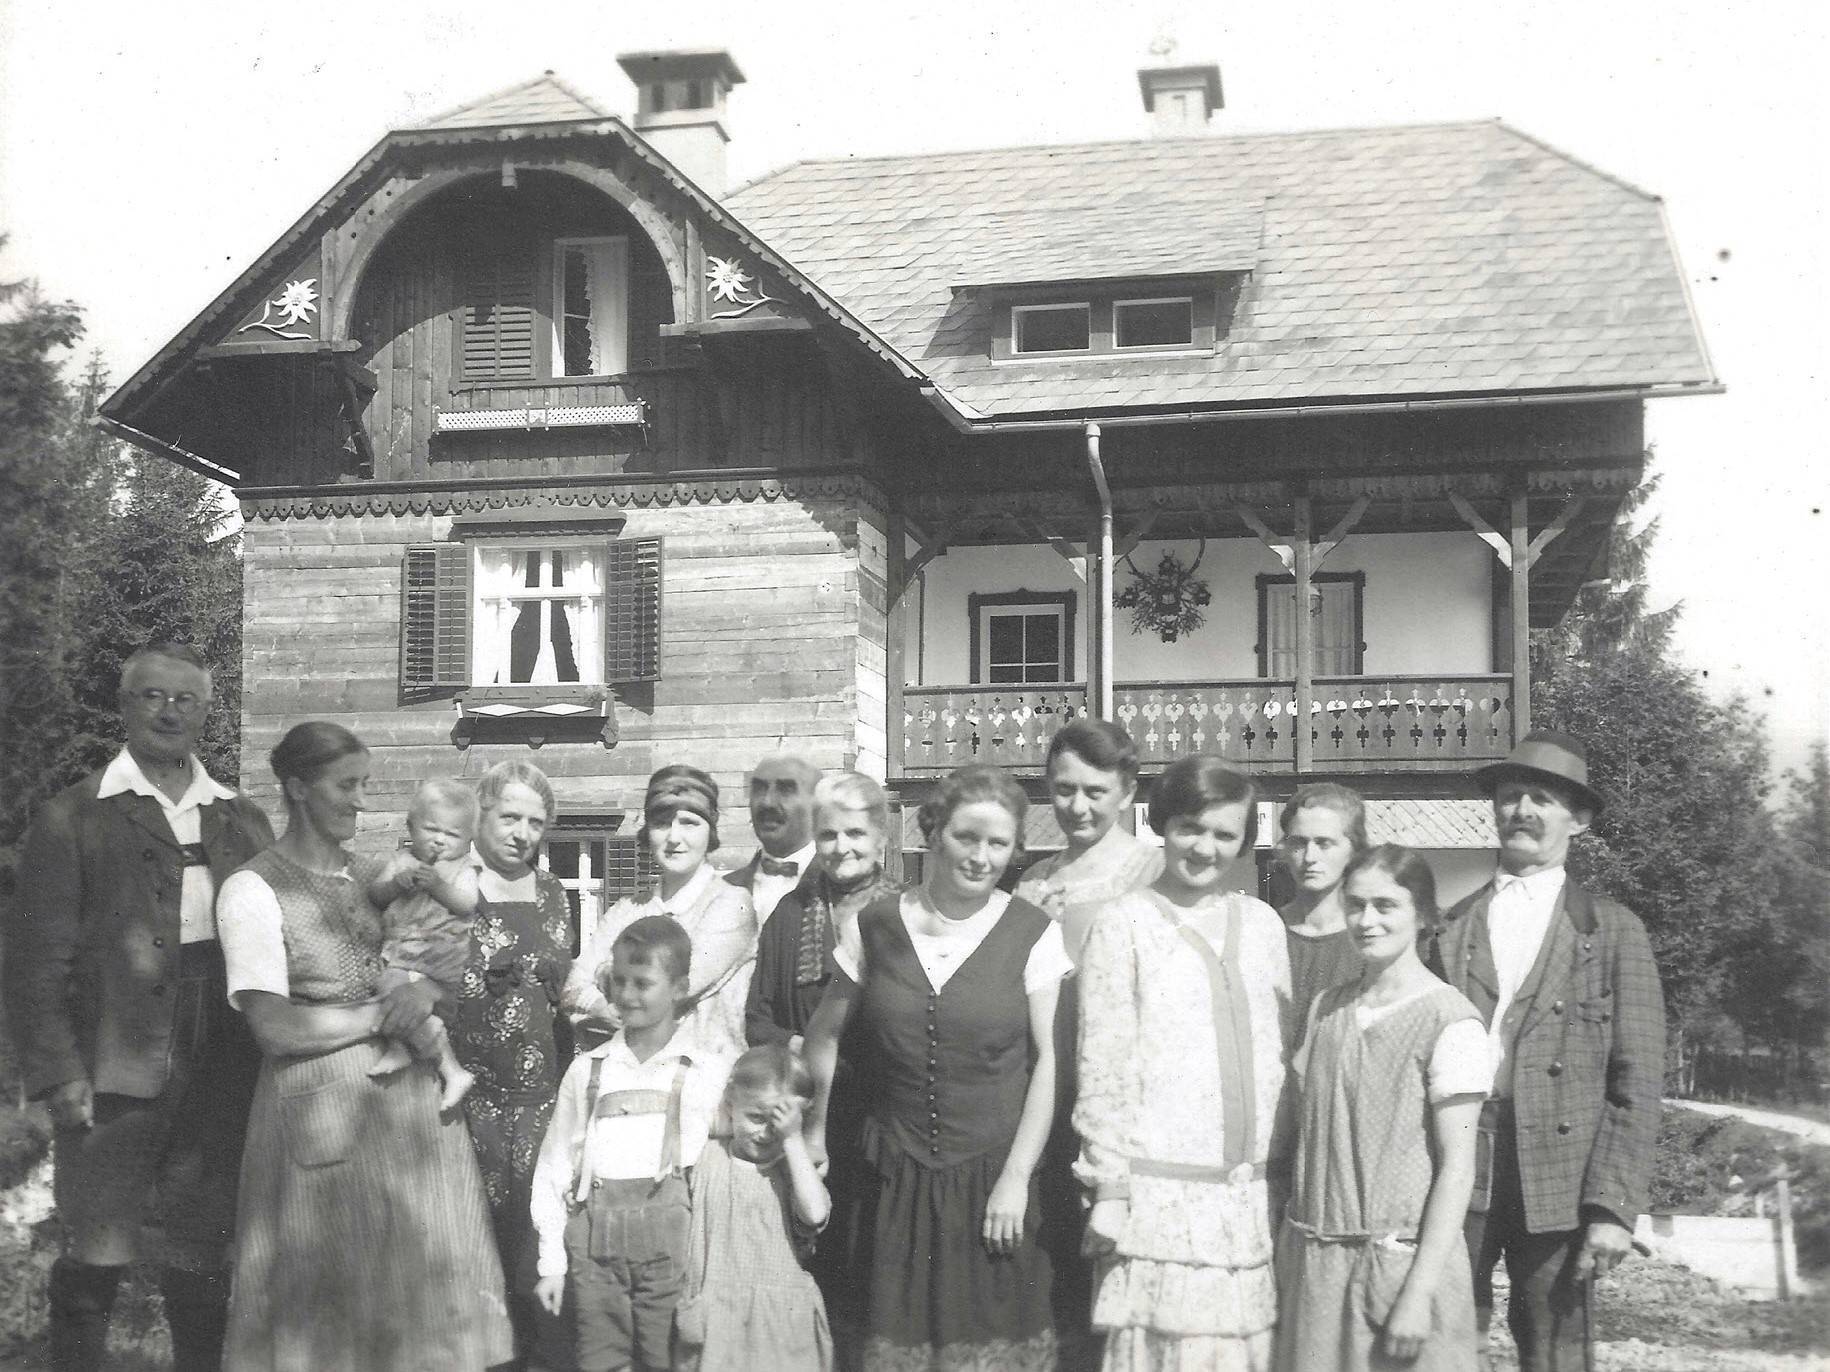 Haus Edelweiss with guests year 1927